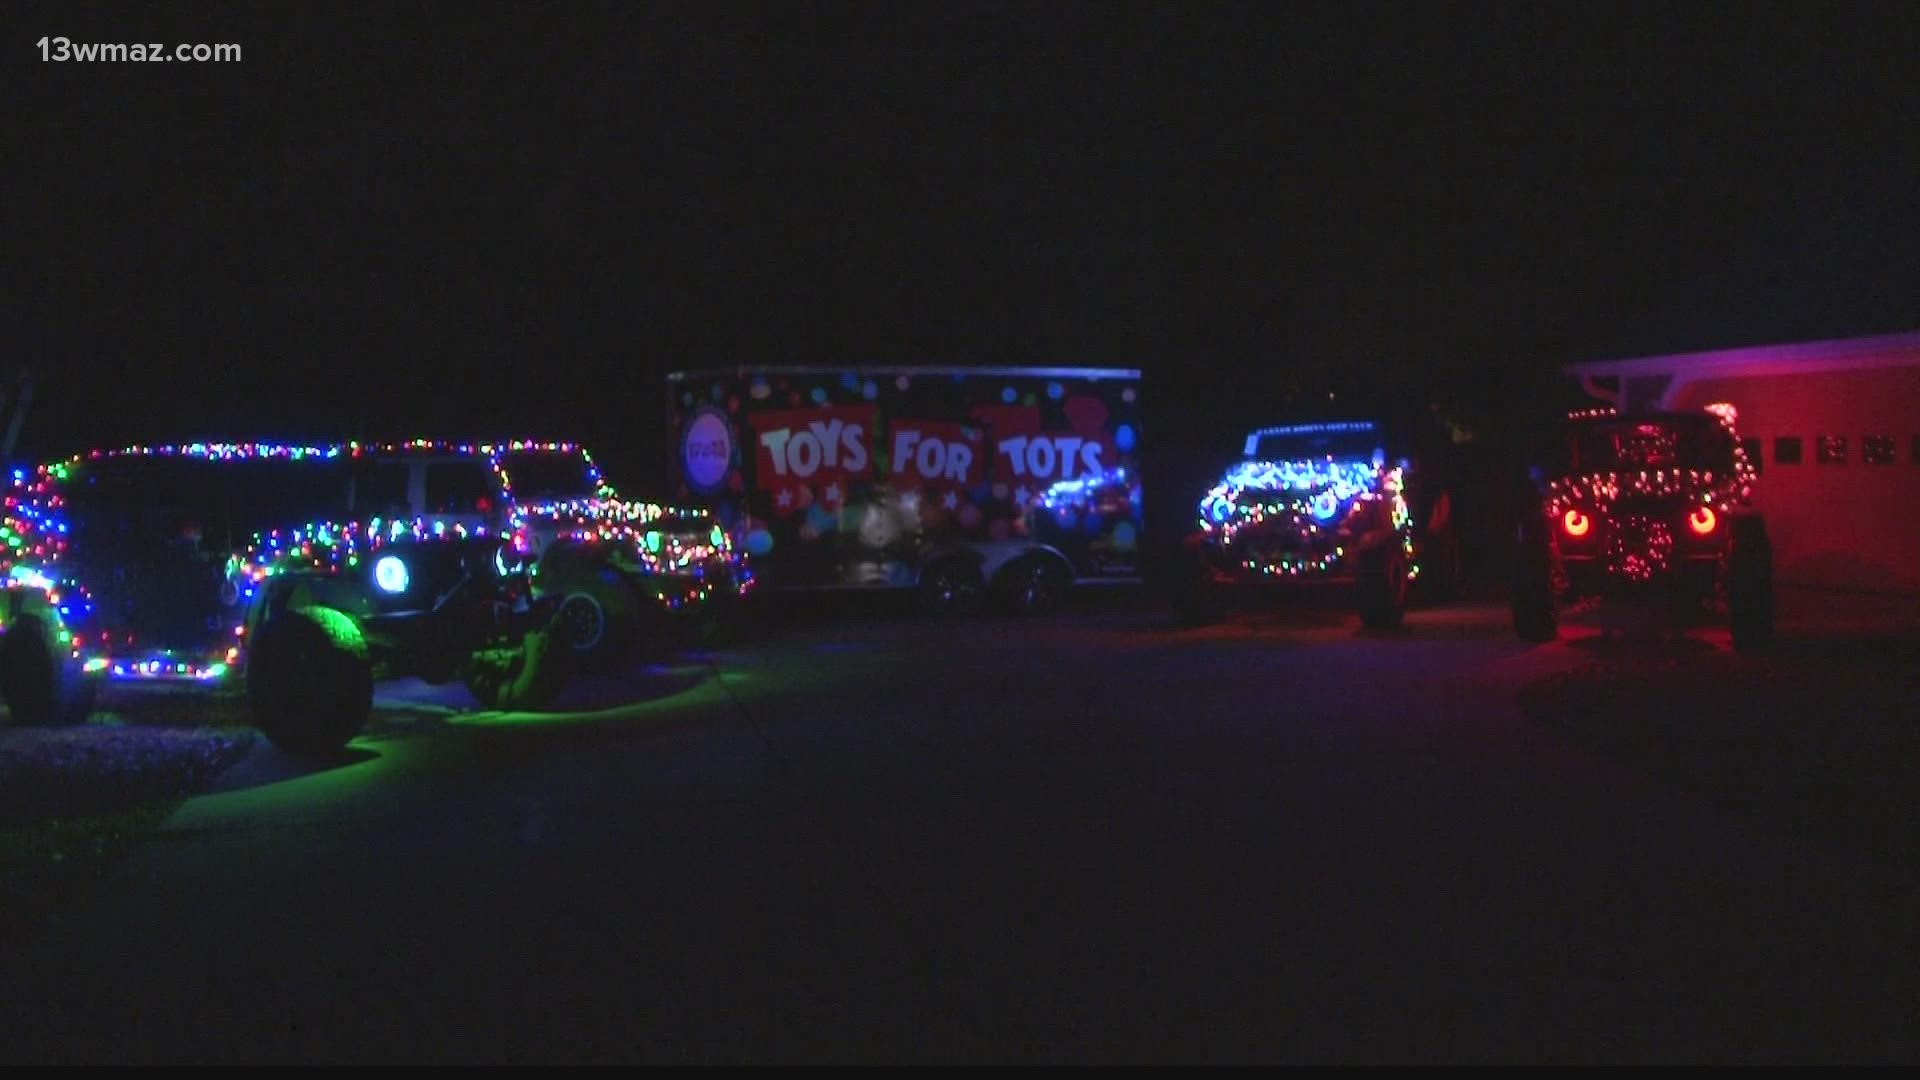 It started out as a fun event for members to check out Christmas lights around town.